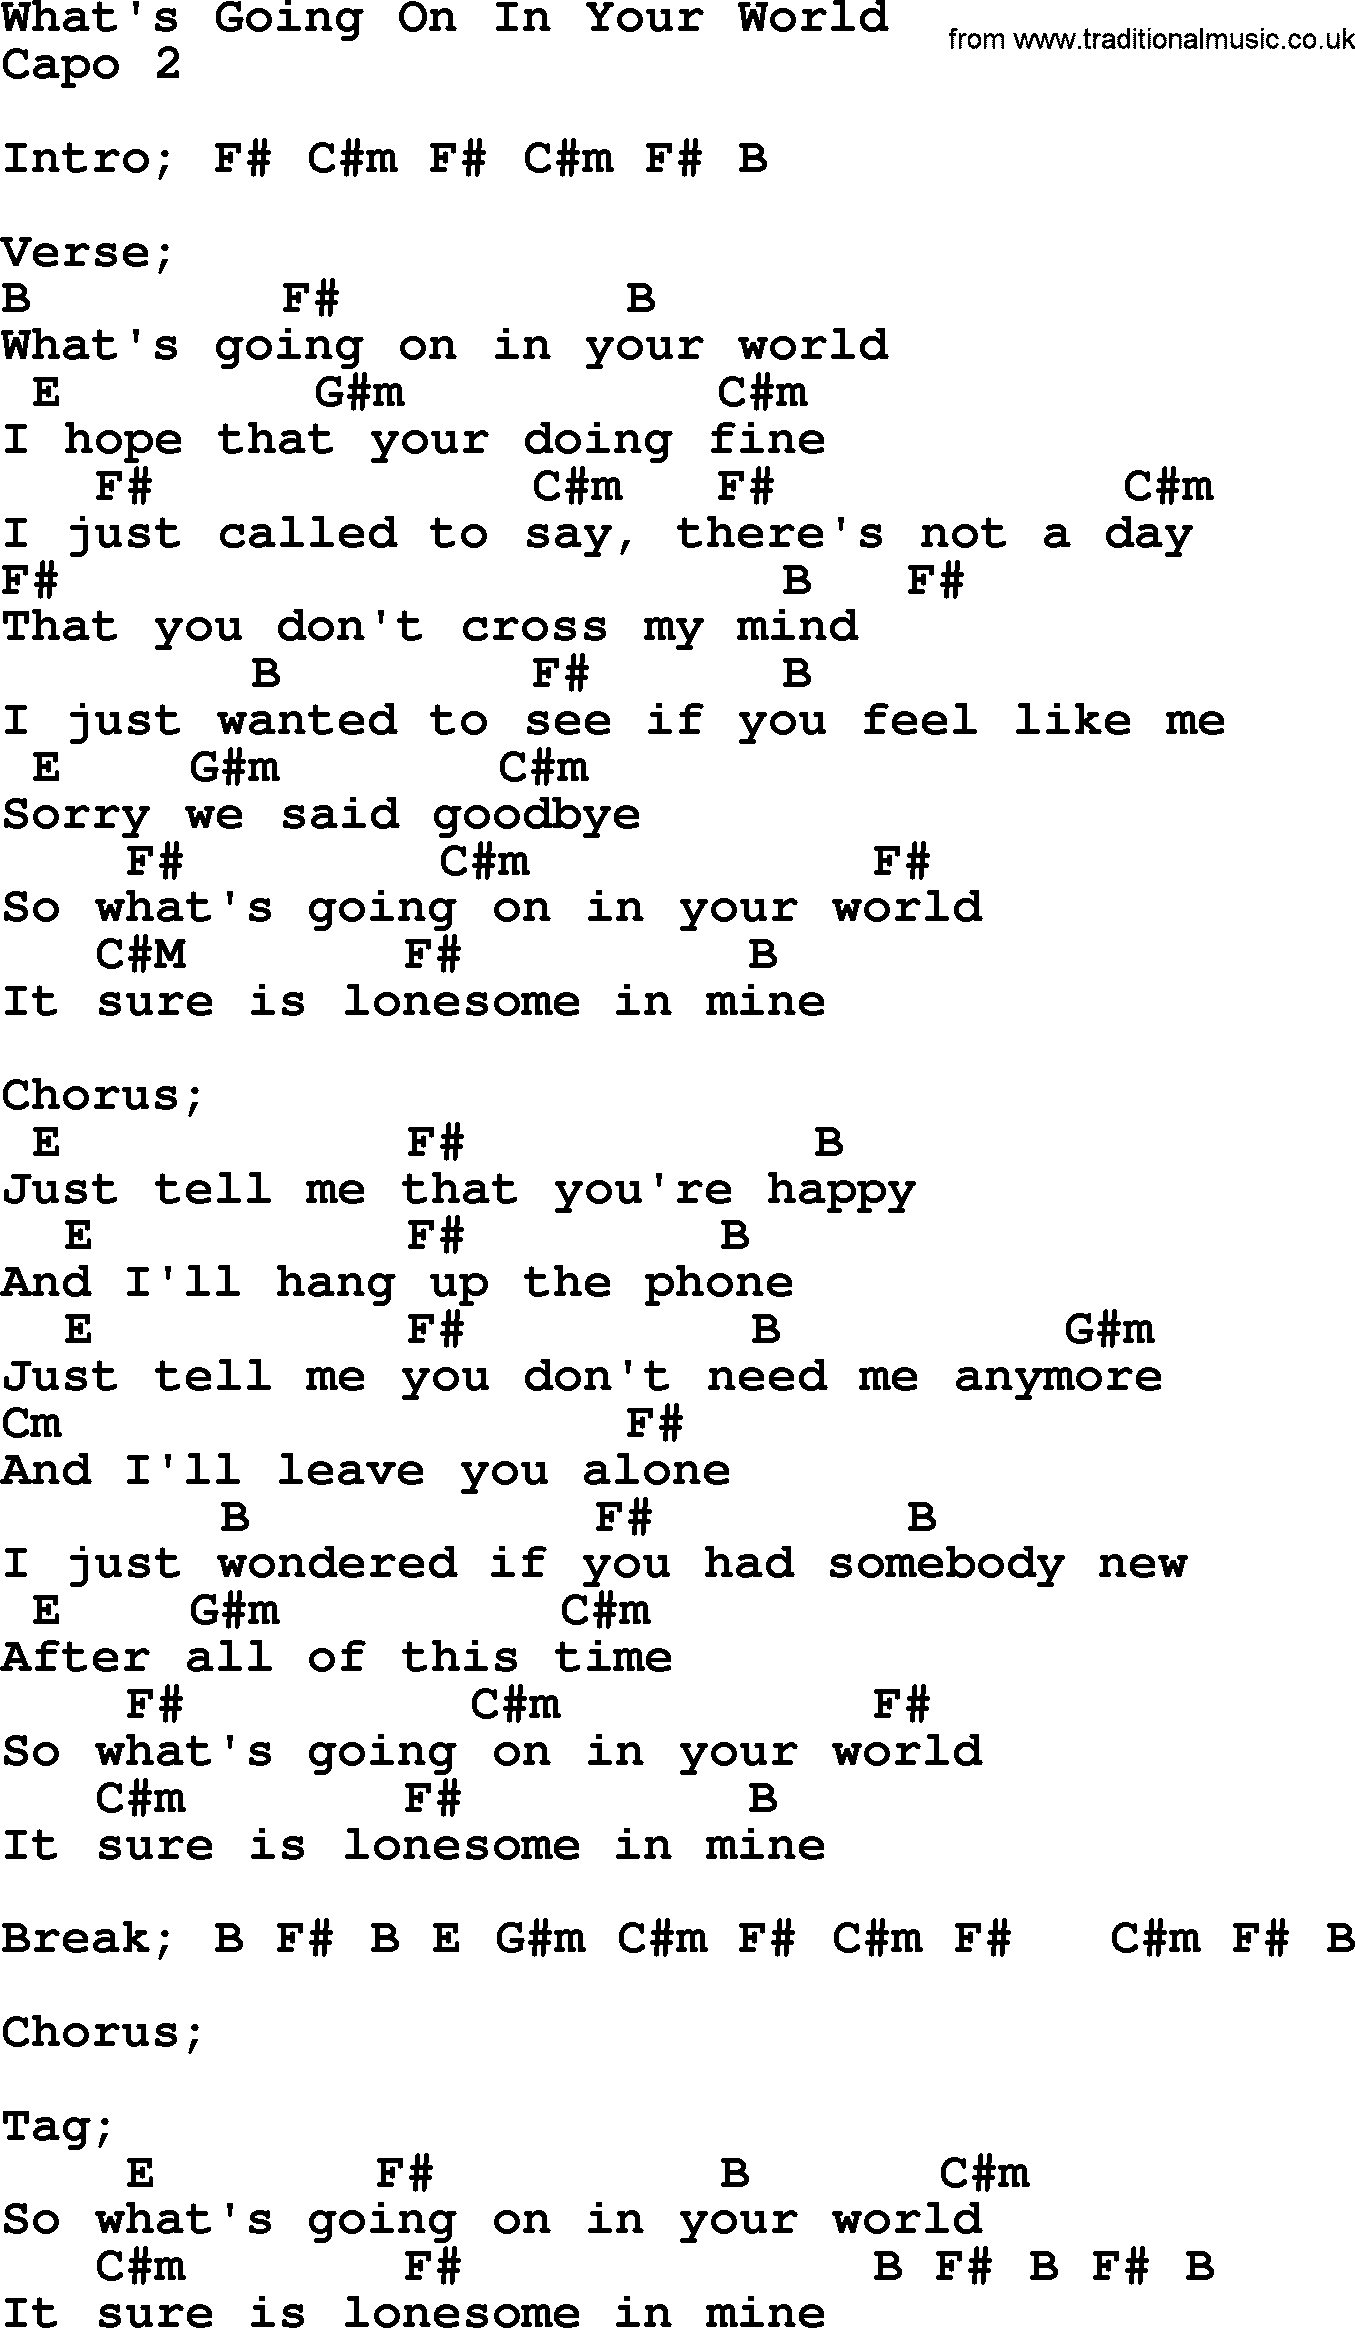 What's Going On Chords Whats Going On In Your World George Strait Lyrics And Chords